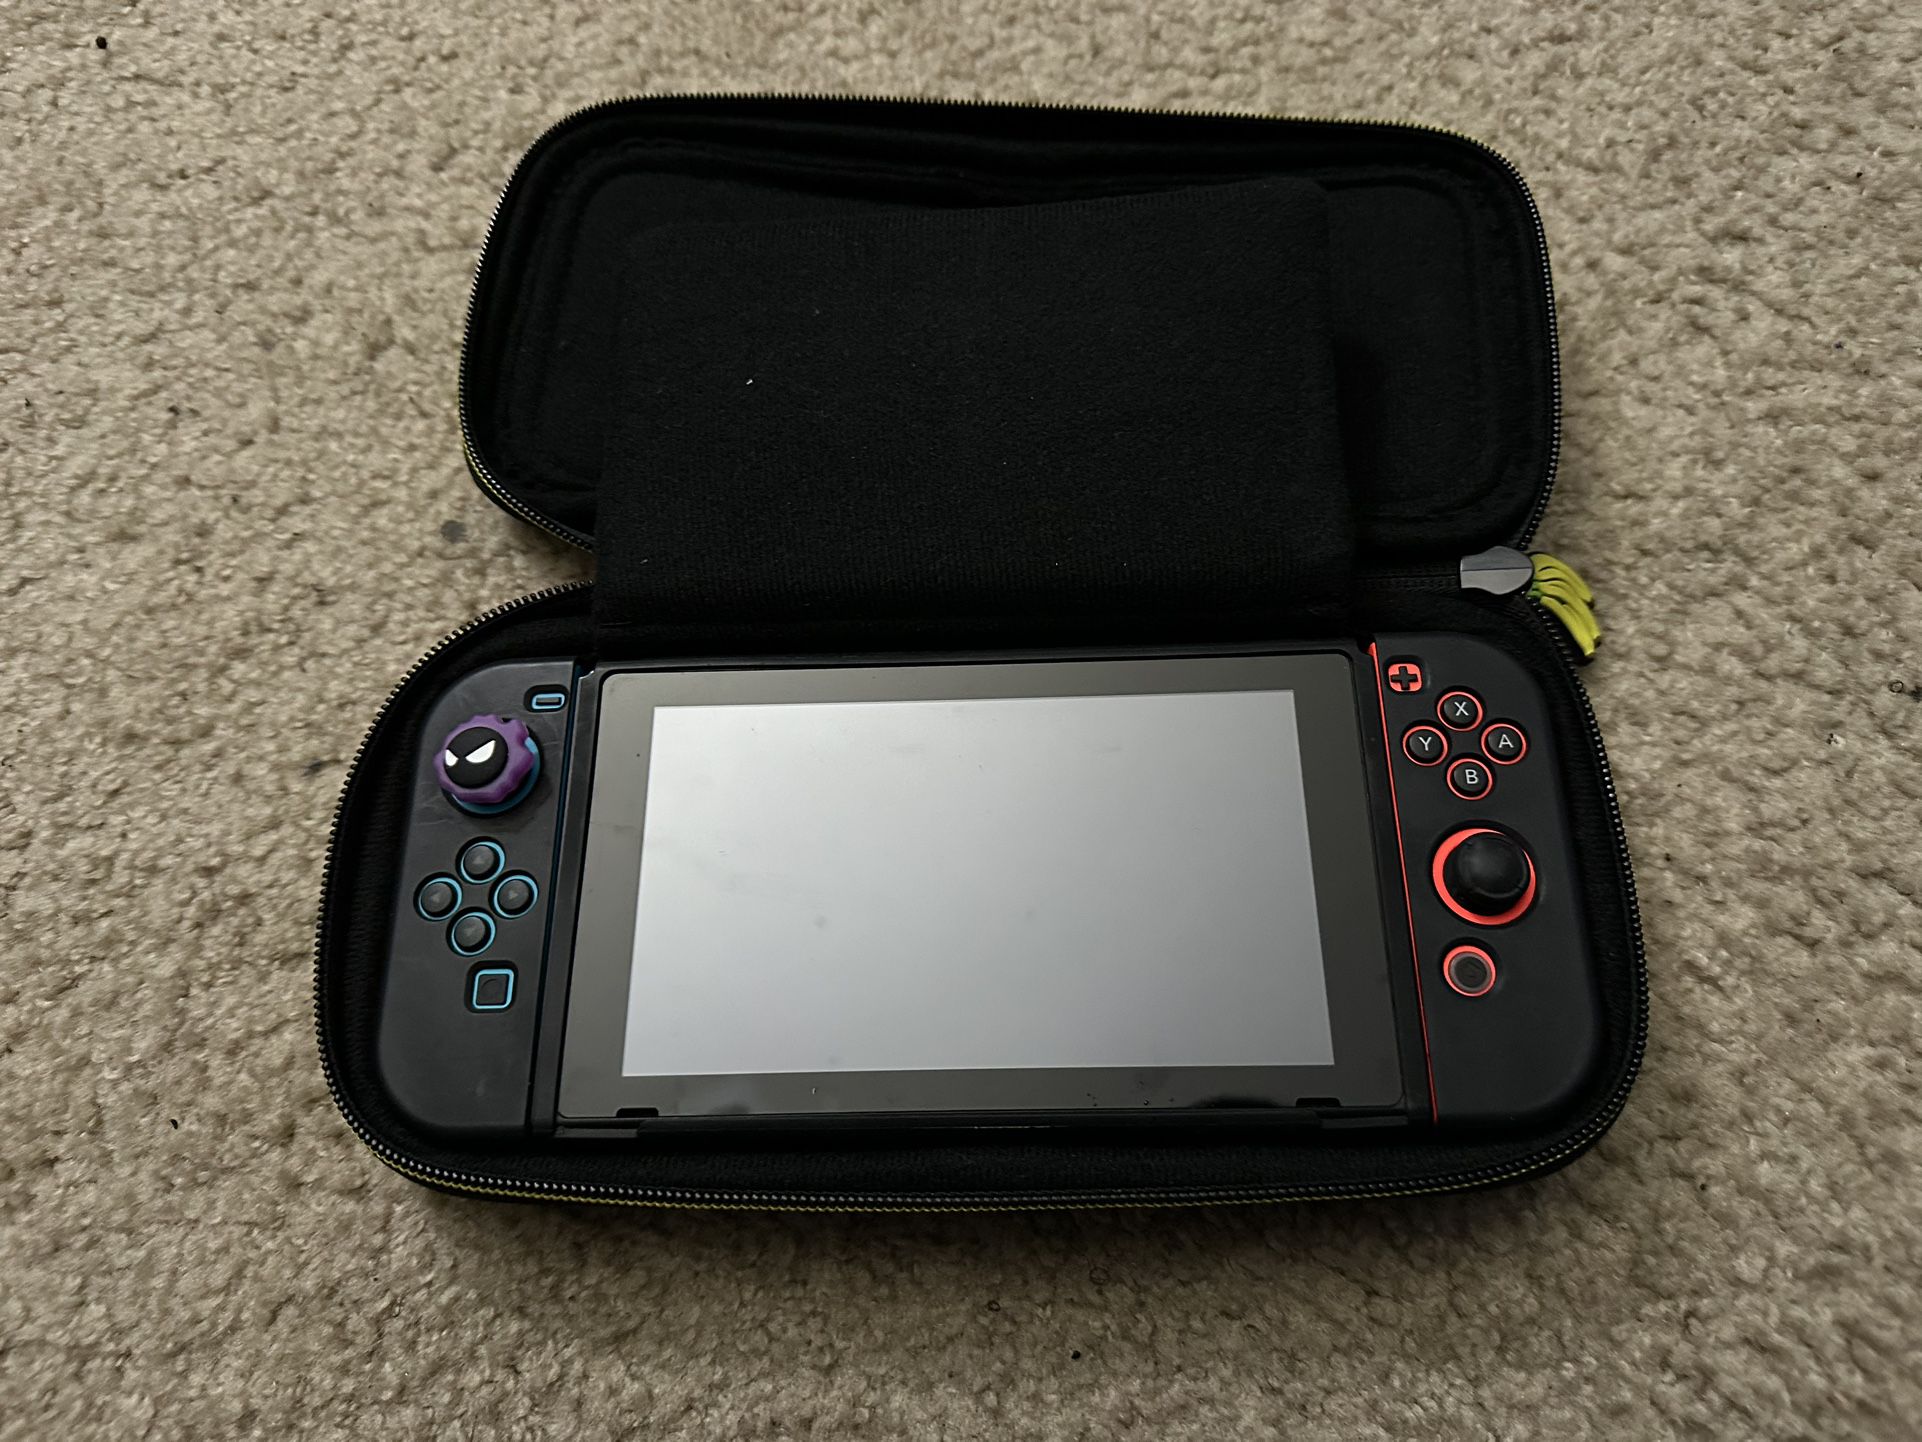 Nintendo Switch for SALE!!